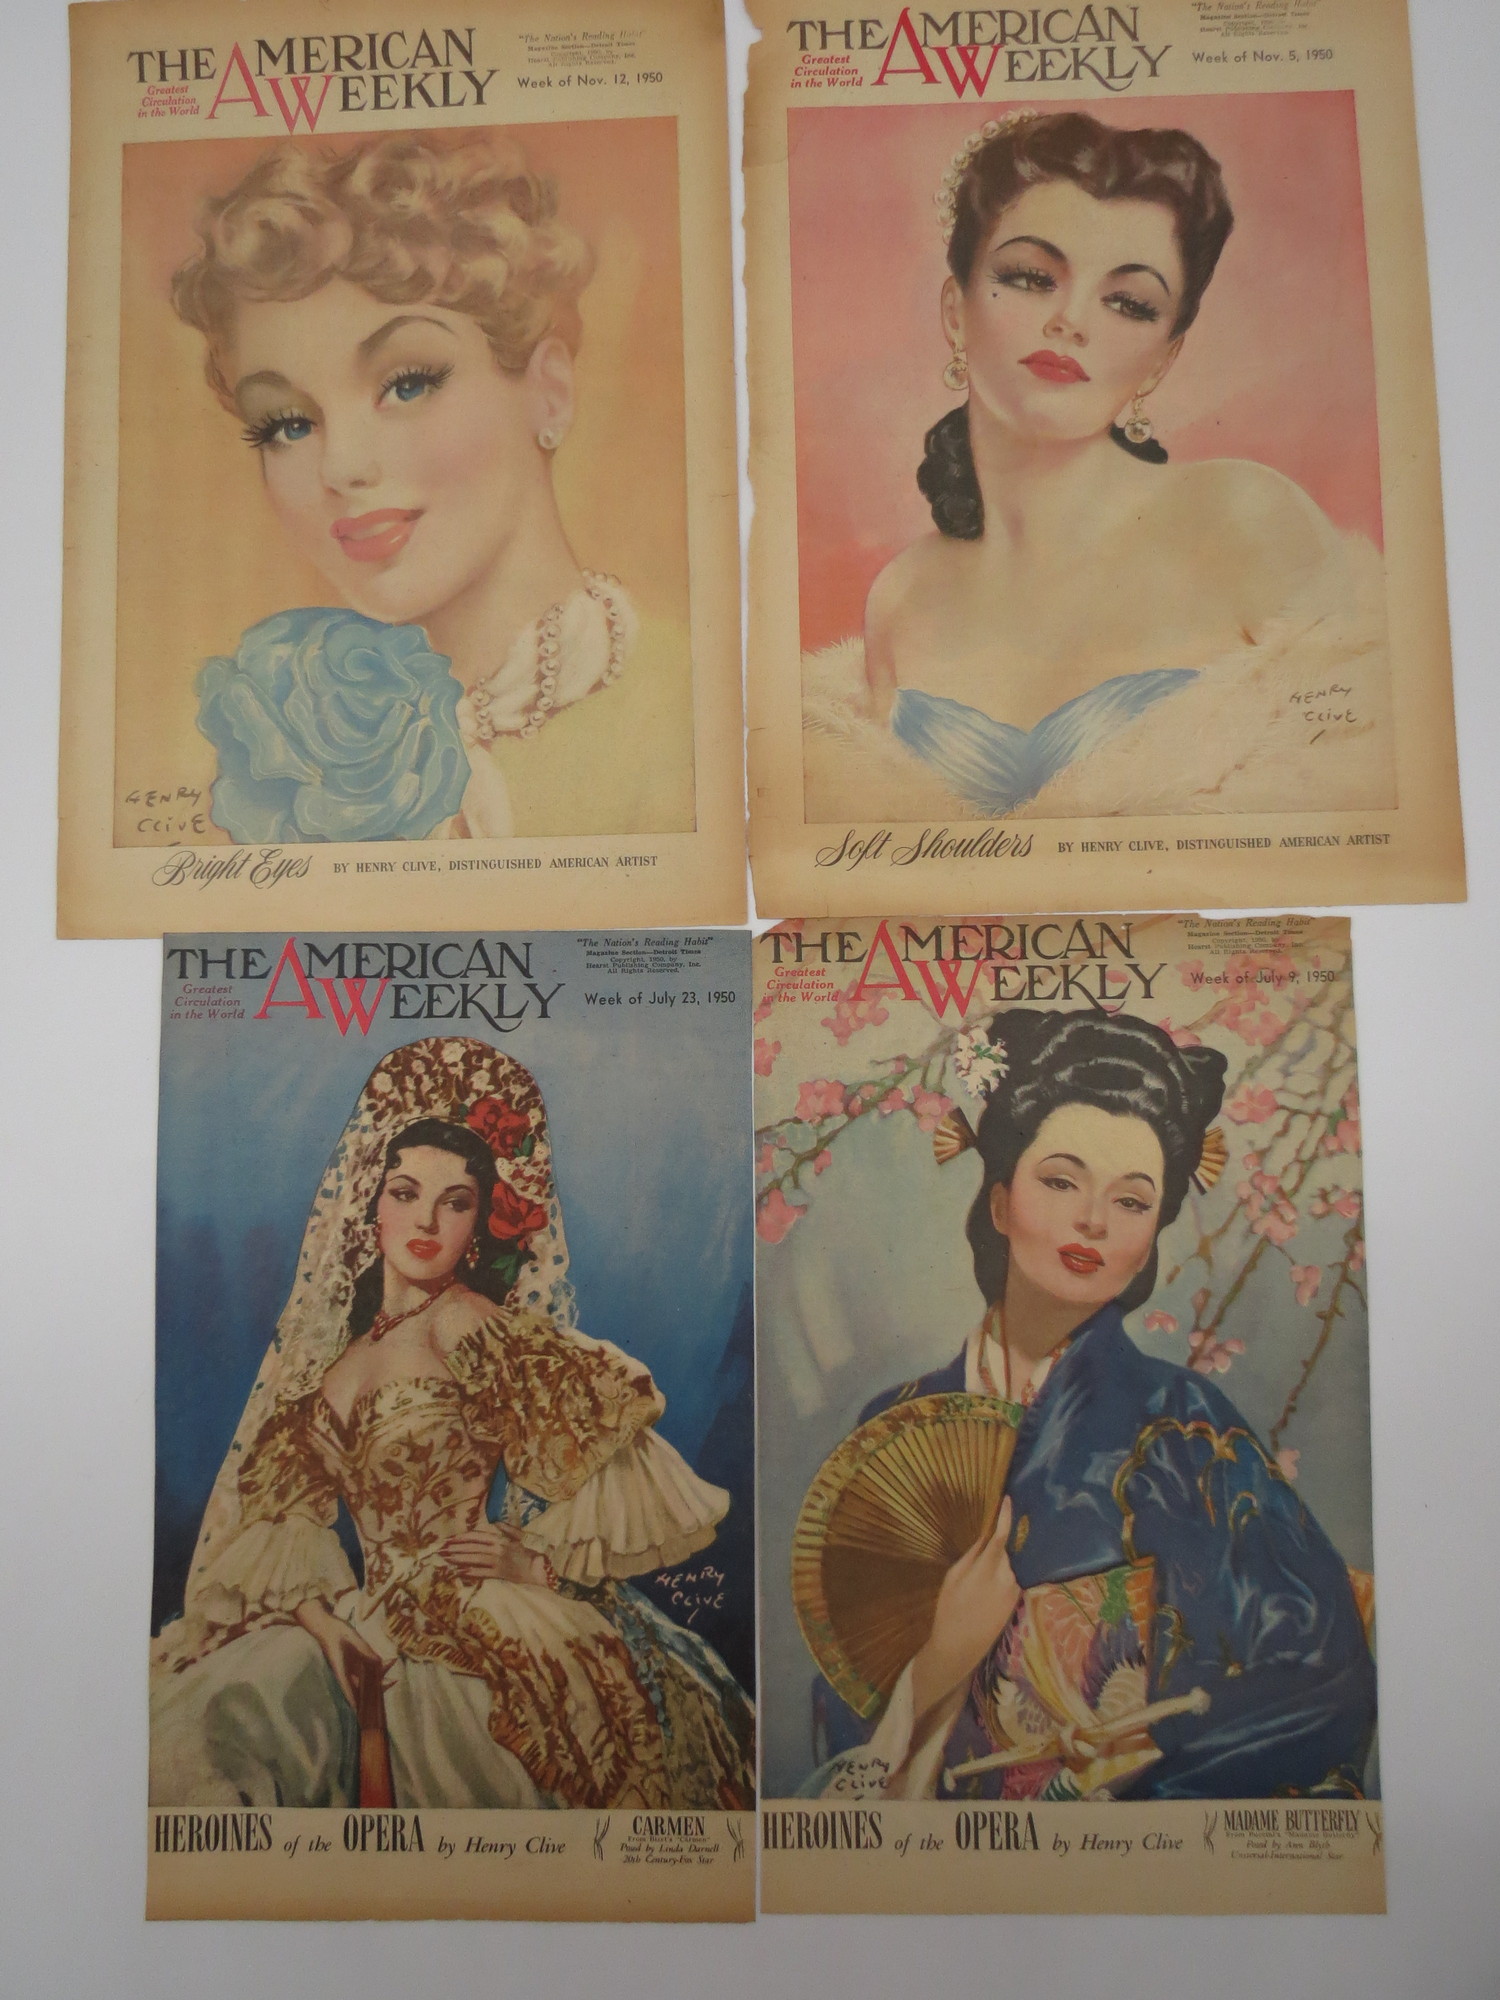 Image for 4 HENRY CLIVE THE AMERICAN WEEKLY MAGAZINE COVERS - JULY 9, JULY 23, NOVEMBER 5, NOVEMBER 12, 1950